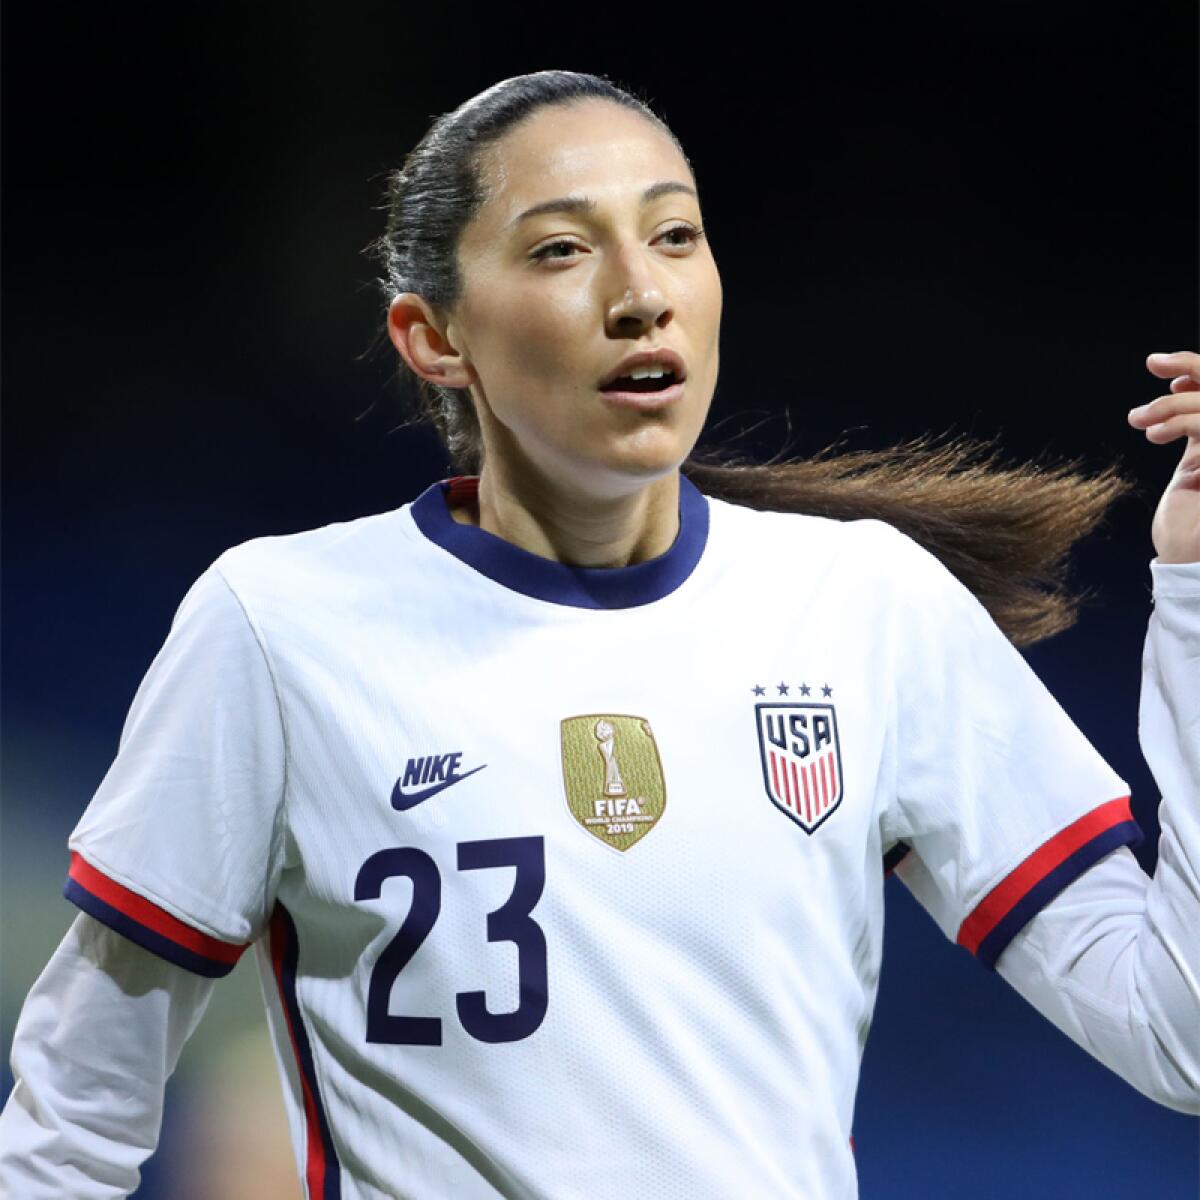 Christen Press announced Sunday she will undergo a fourth surgery to repair her right knee.